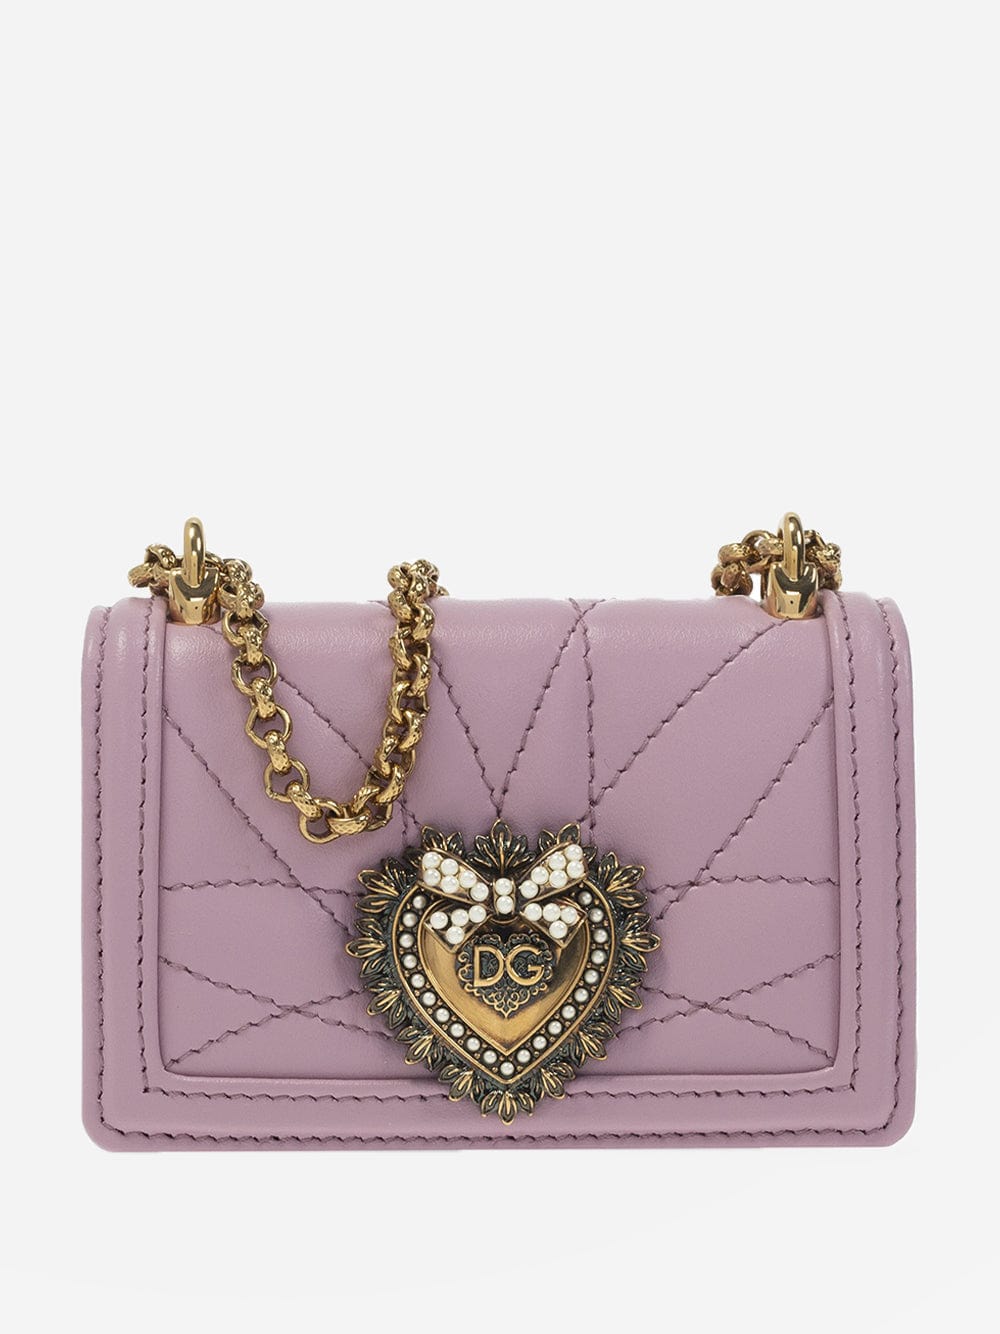 Dolce & Gabbana Devotion Quilted Micro Bag